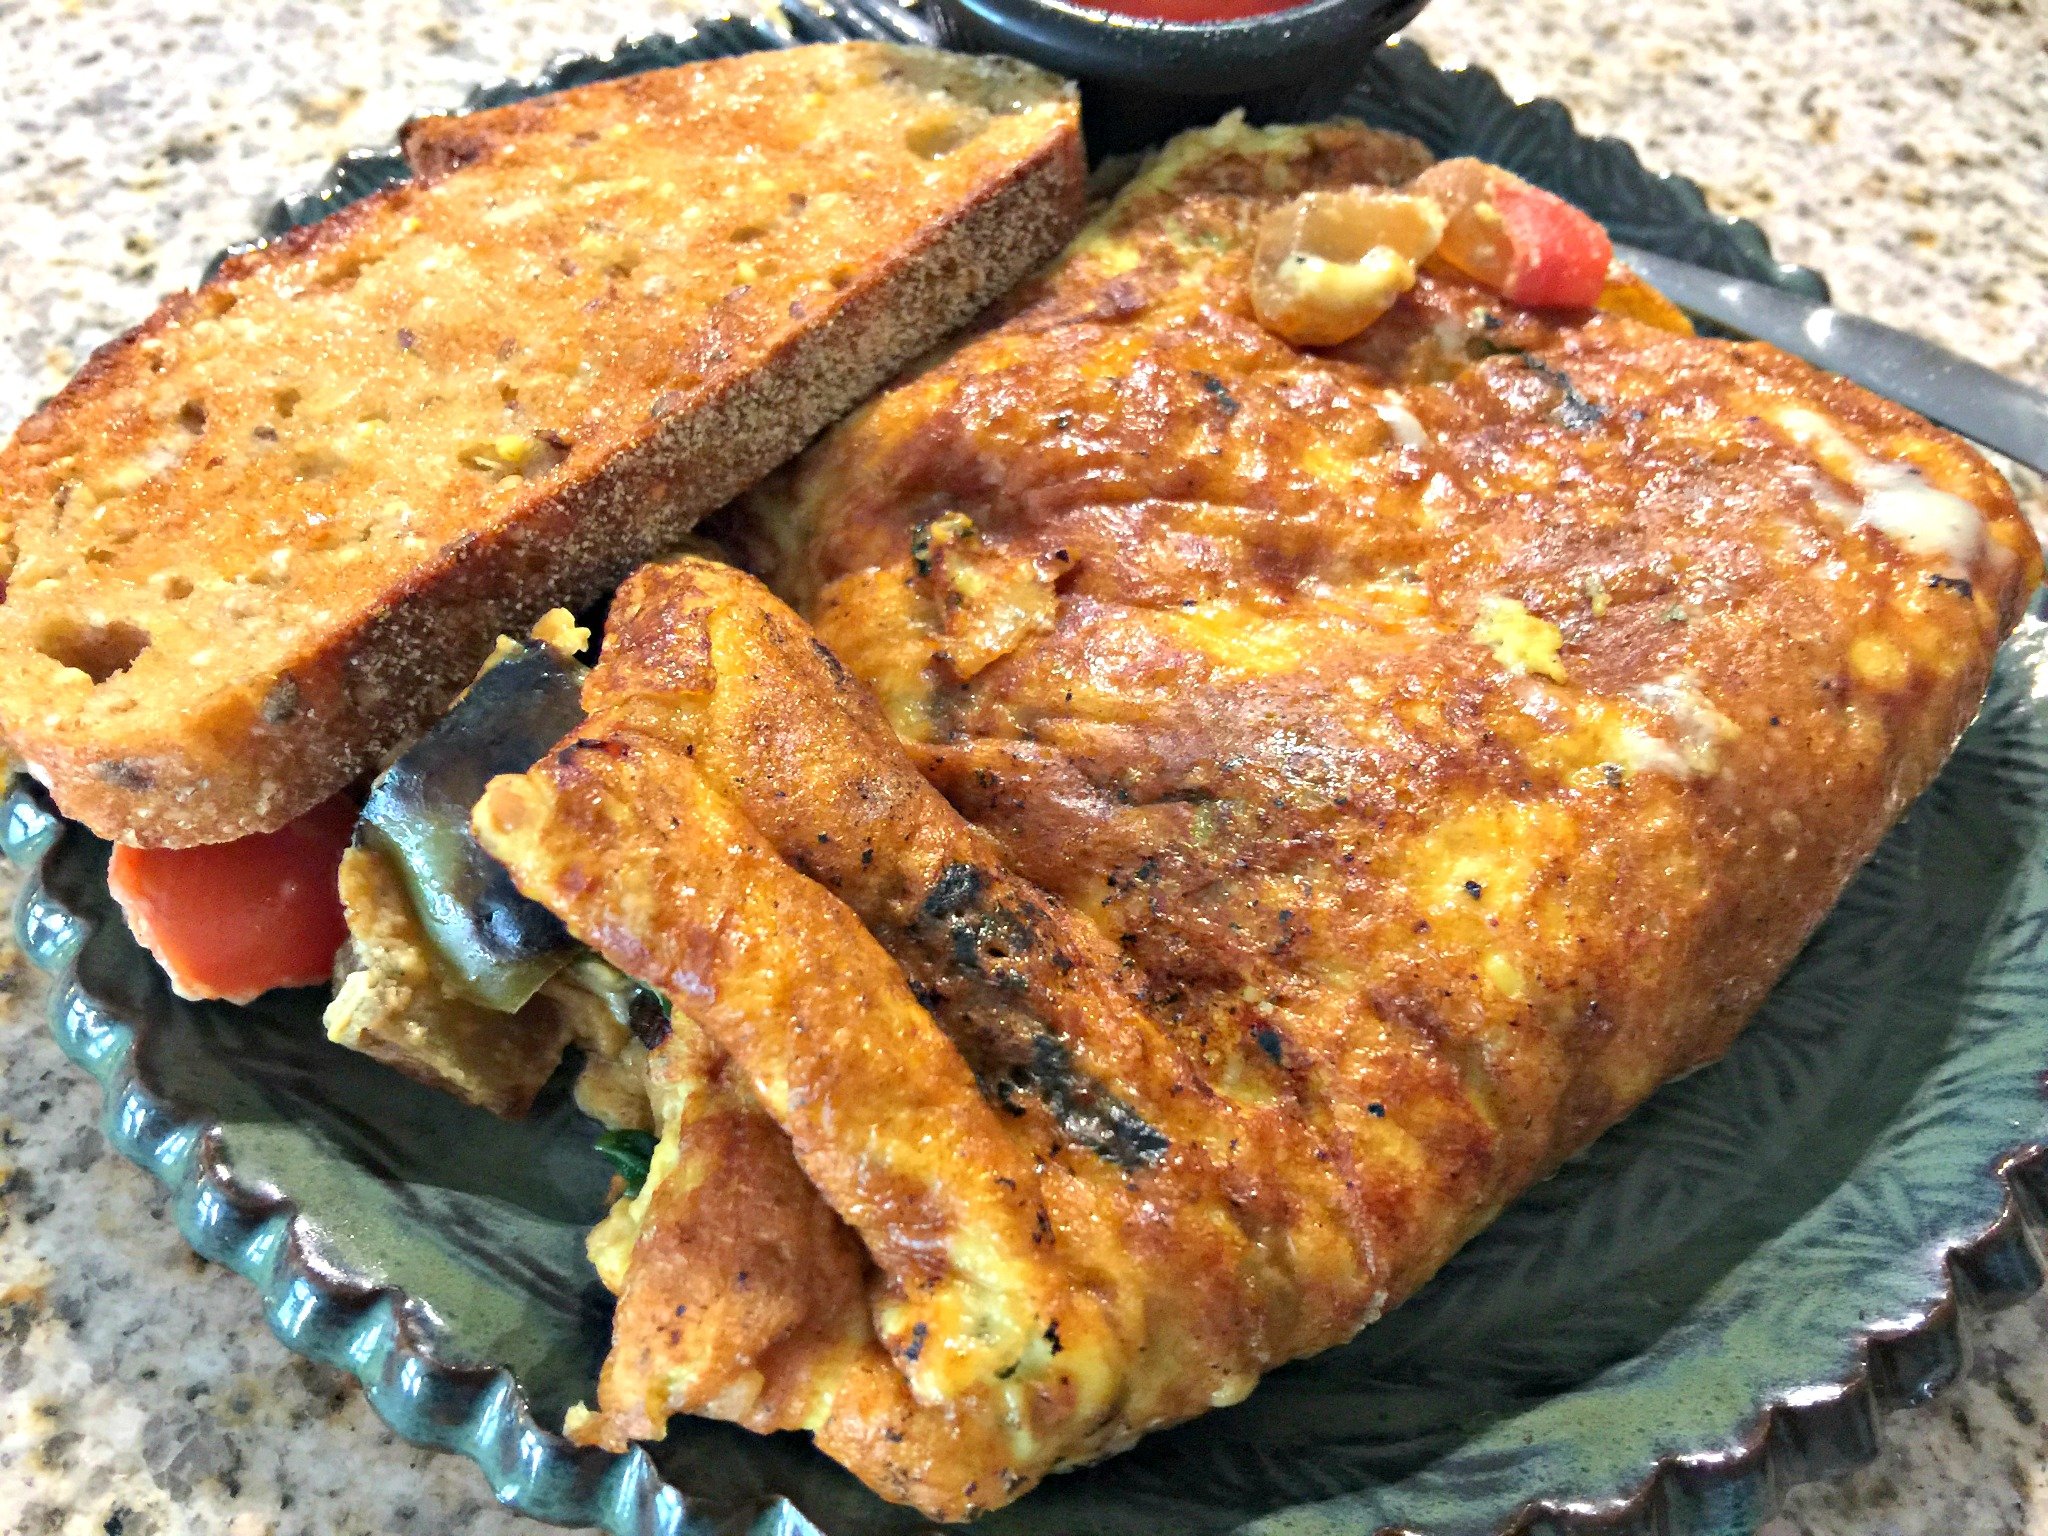 Vegetable Omelet: Sautéed Onions, Tomatoes, Spinach, Bell Peppers with Pepperjack Cheese. 